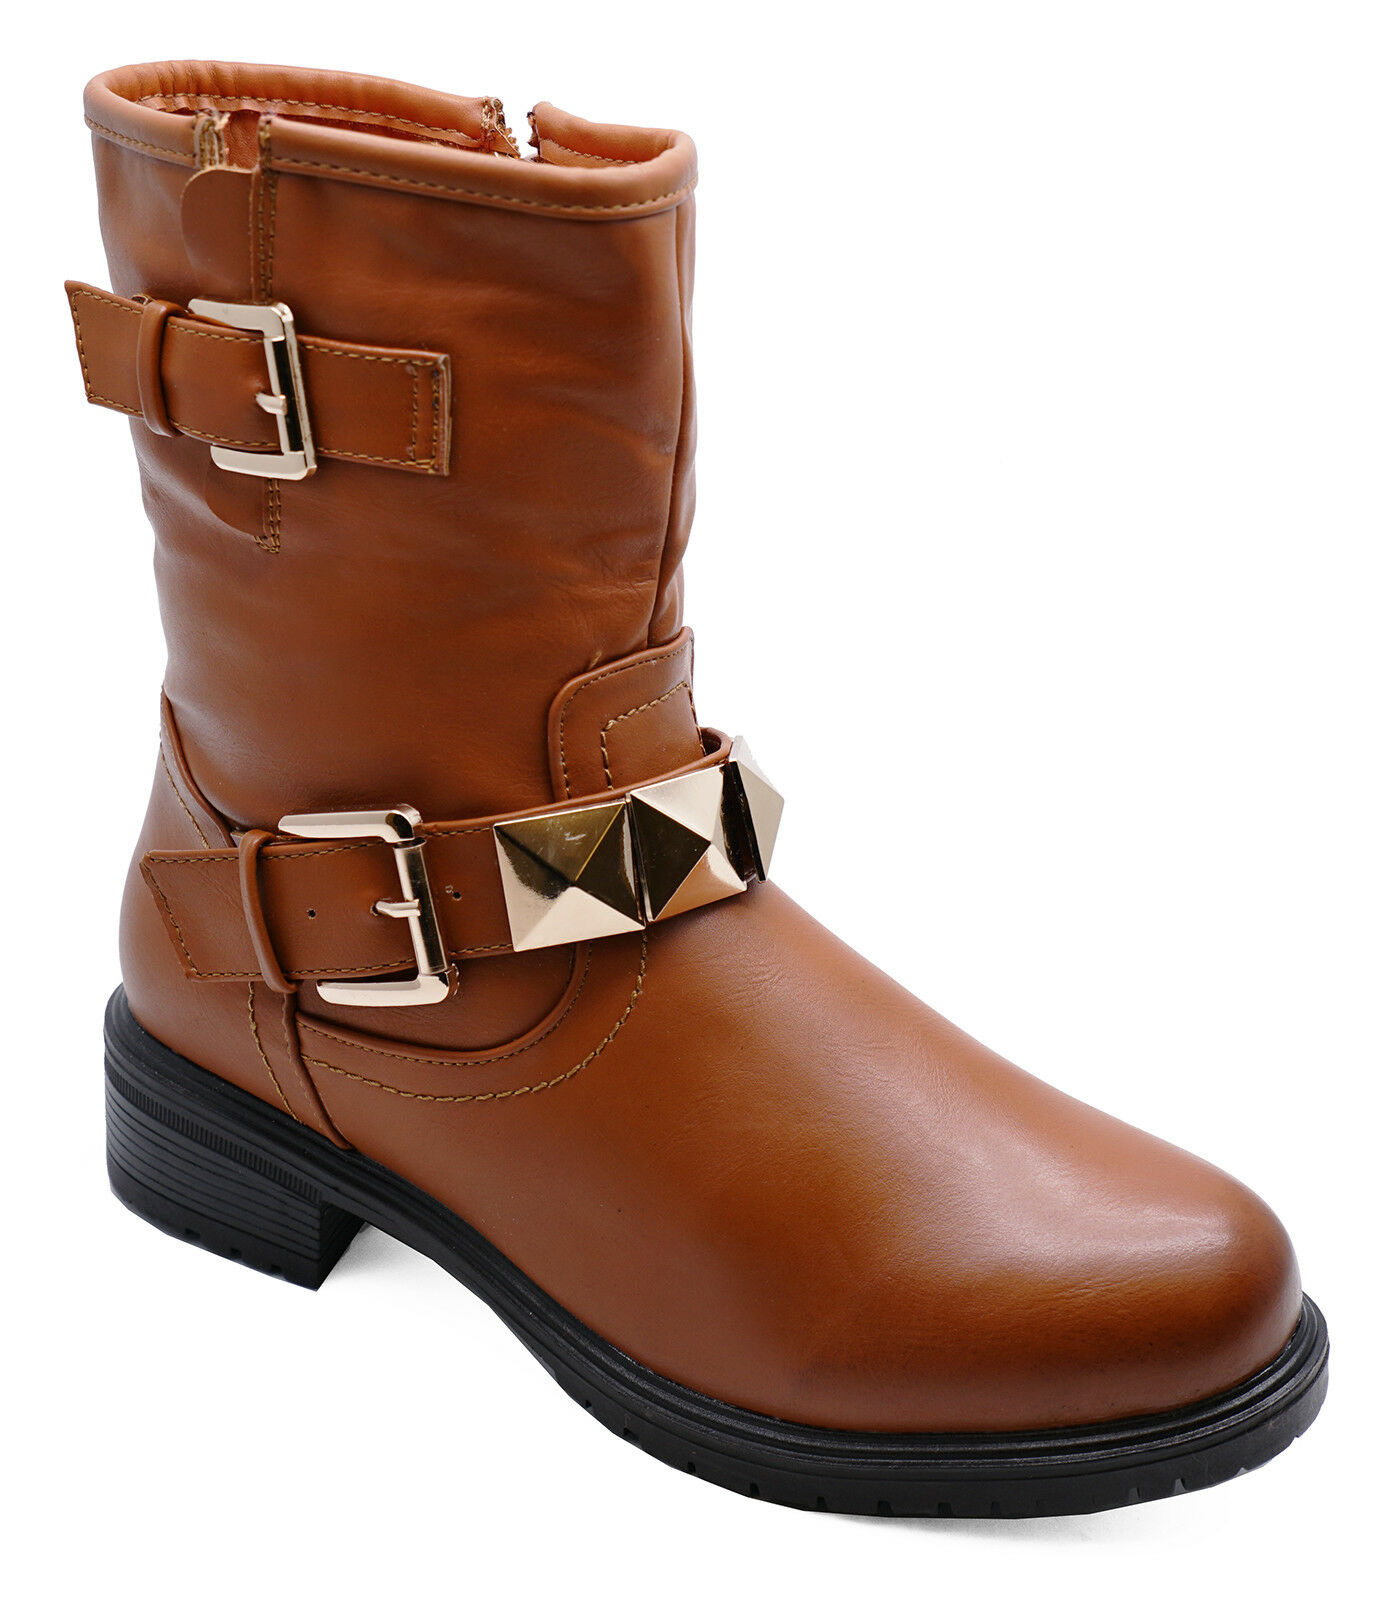 comfy safety boots uk